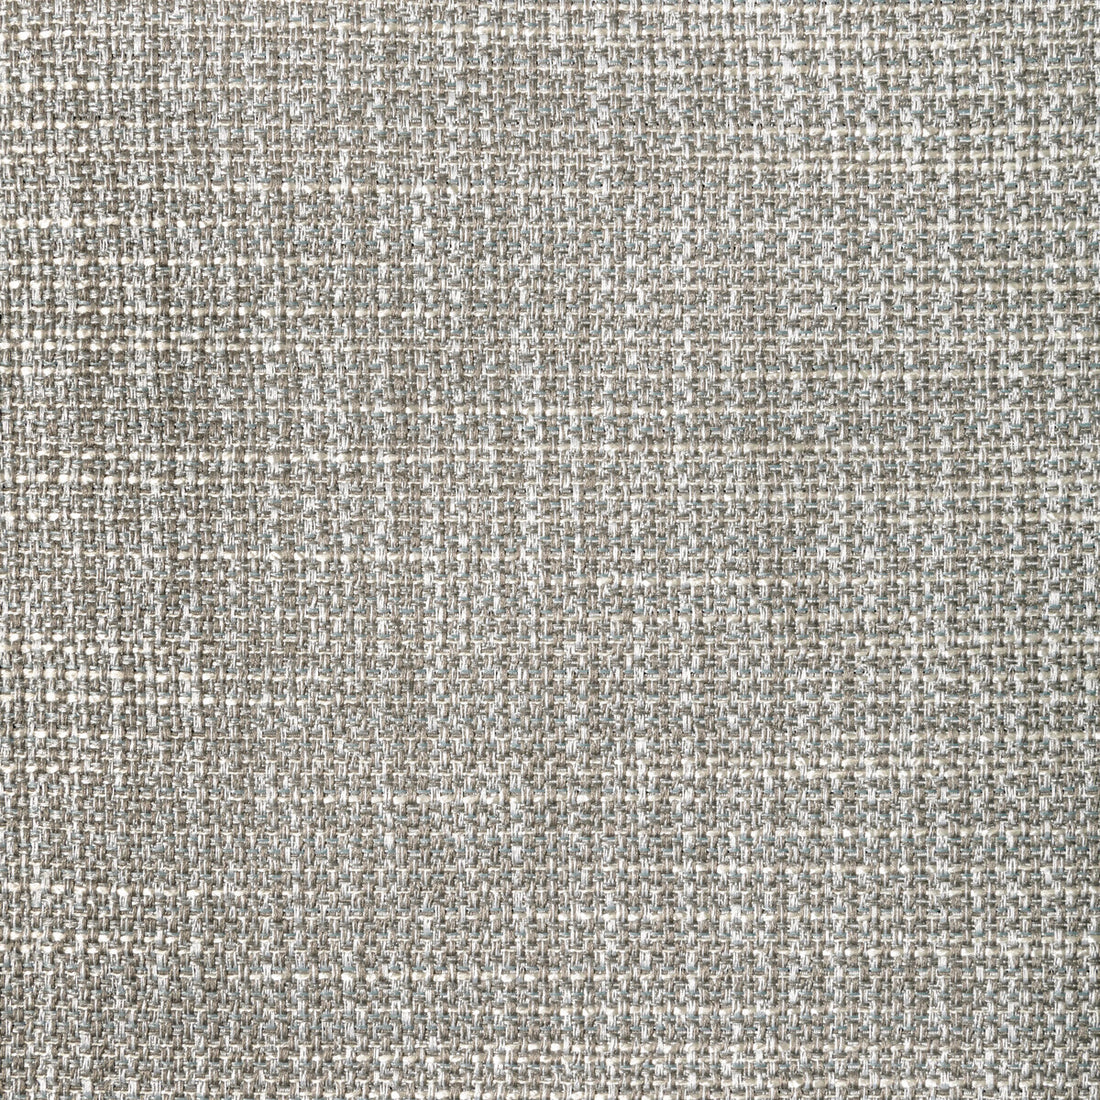 Luma Texture fabric in overcast color - pattern 4947.1511.0 - by Kravet Contract in the Fr Window Luma Texture collection